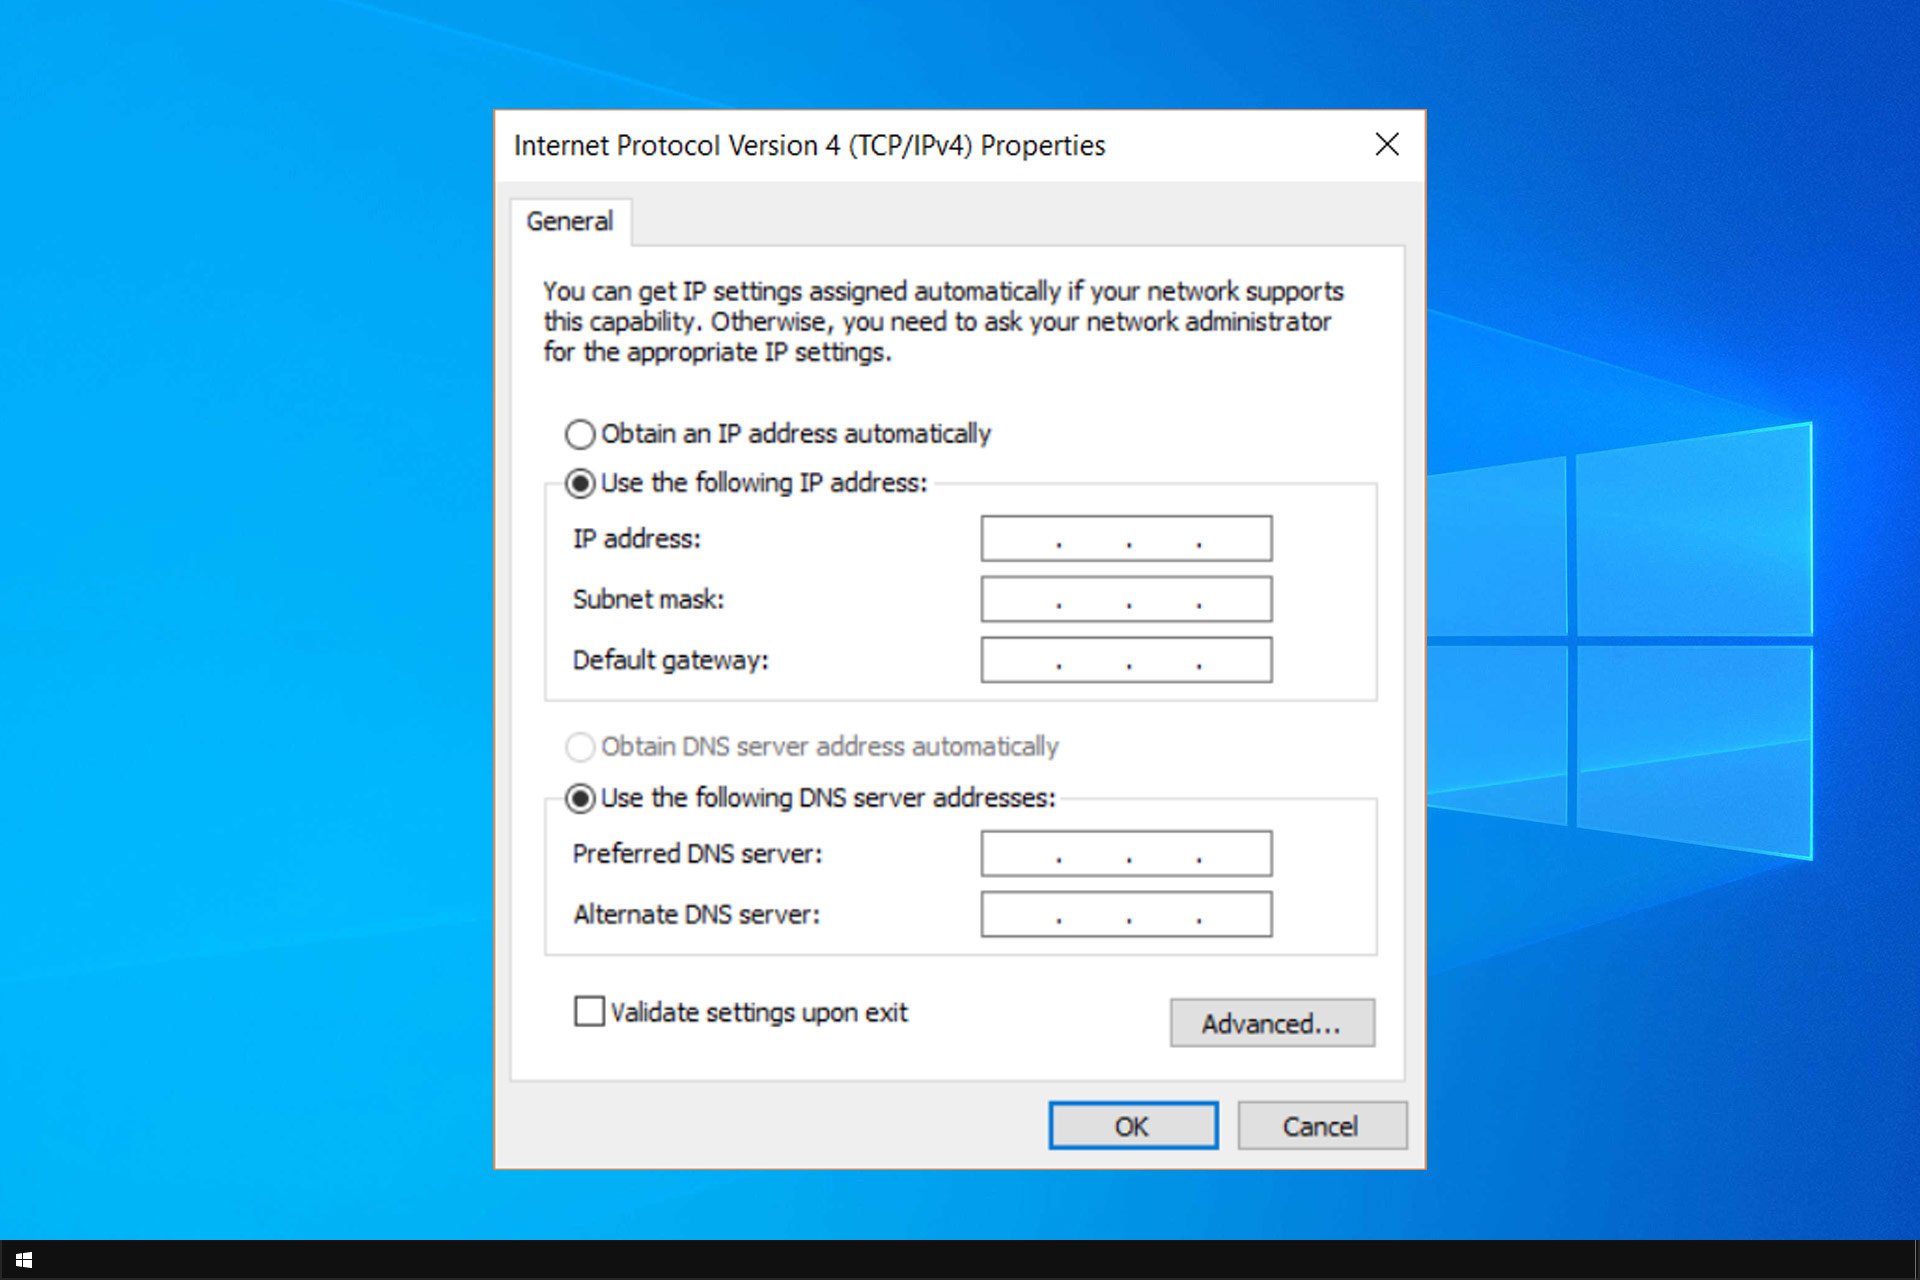 DHCP Not Working on Windows 10: How to Enable it Again